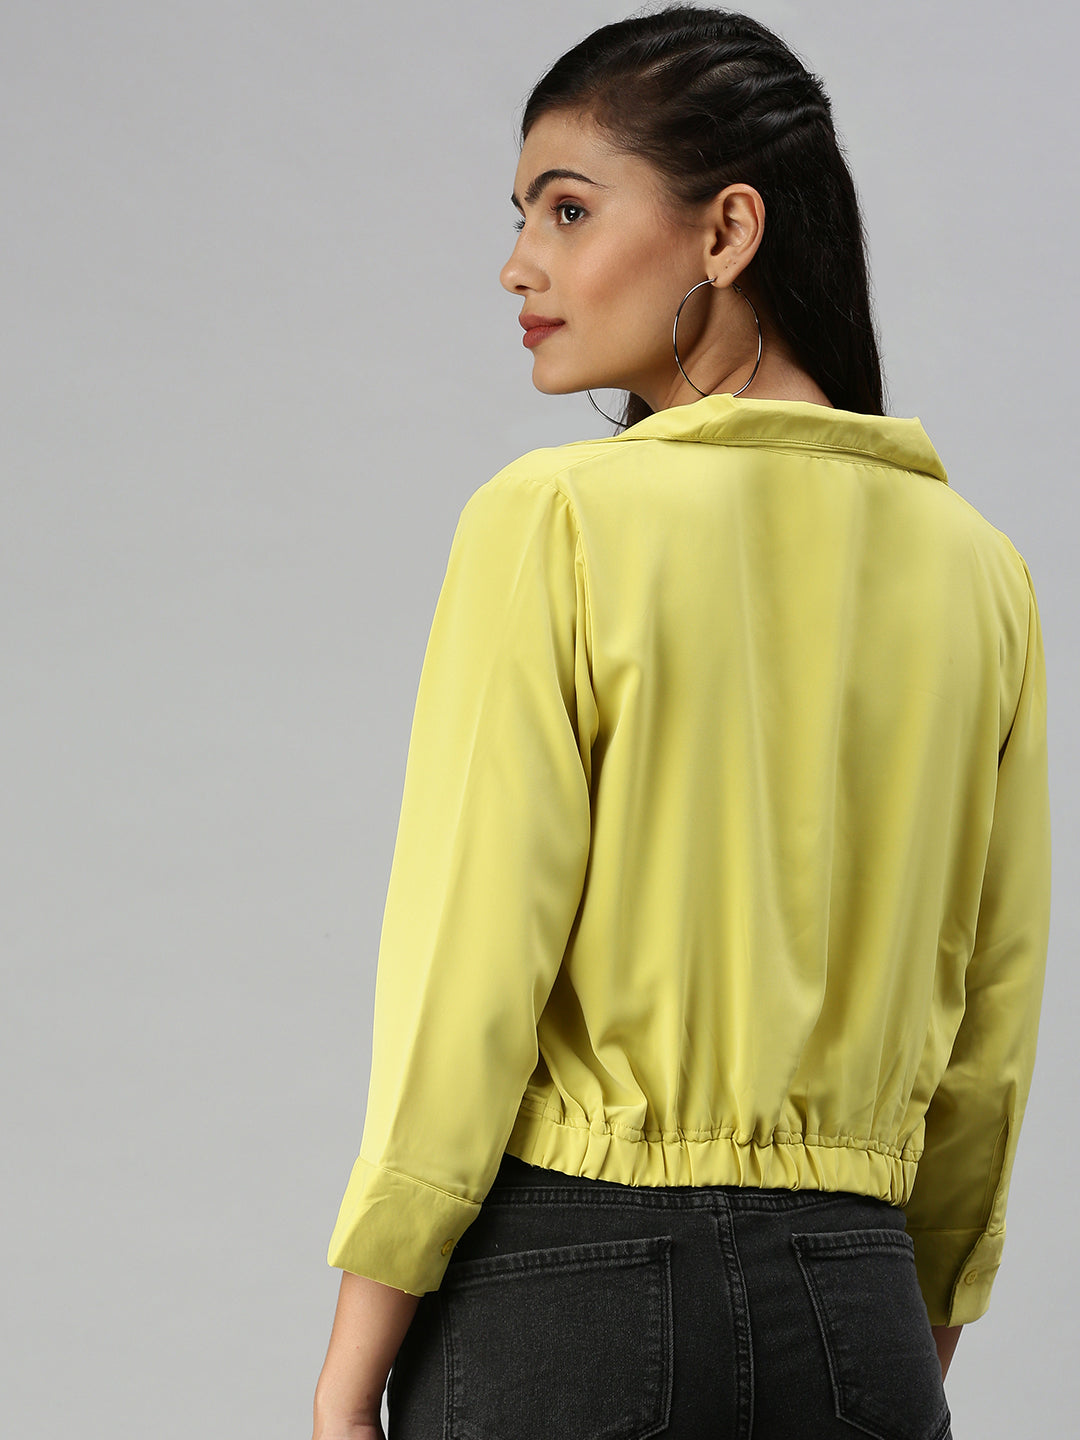 Women's Lime Green Solid Top